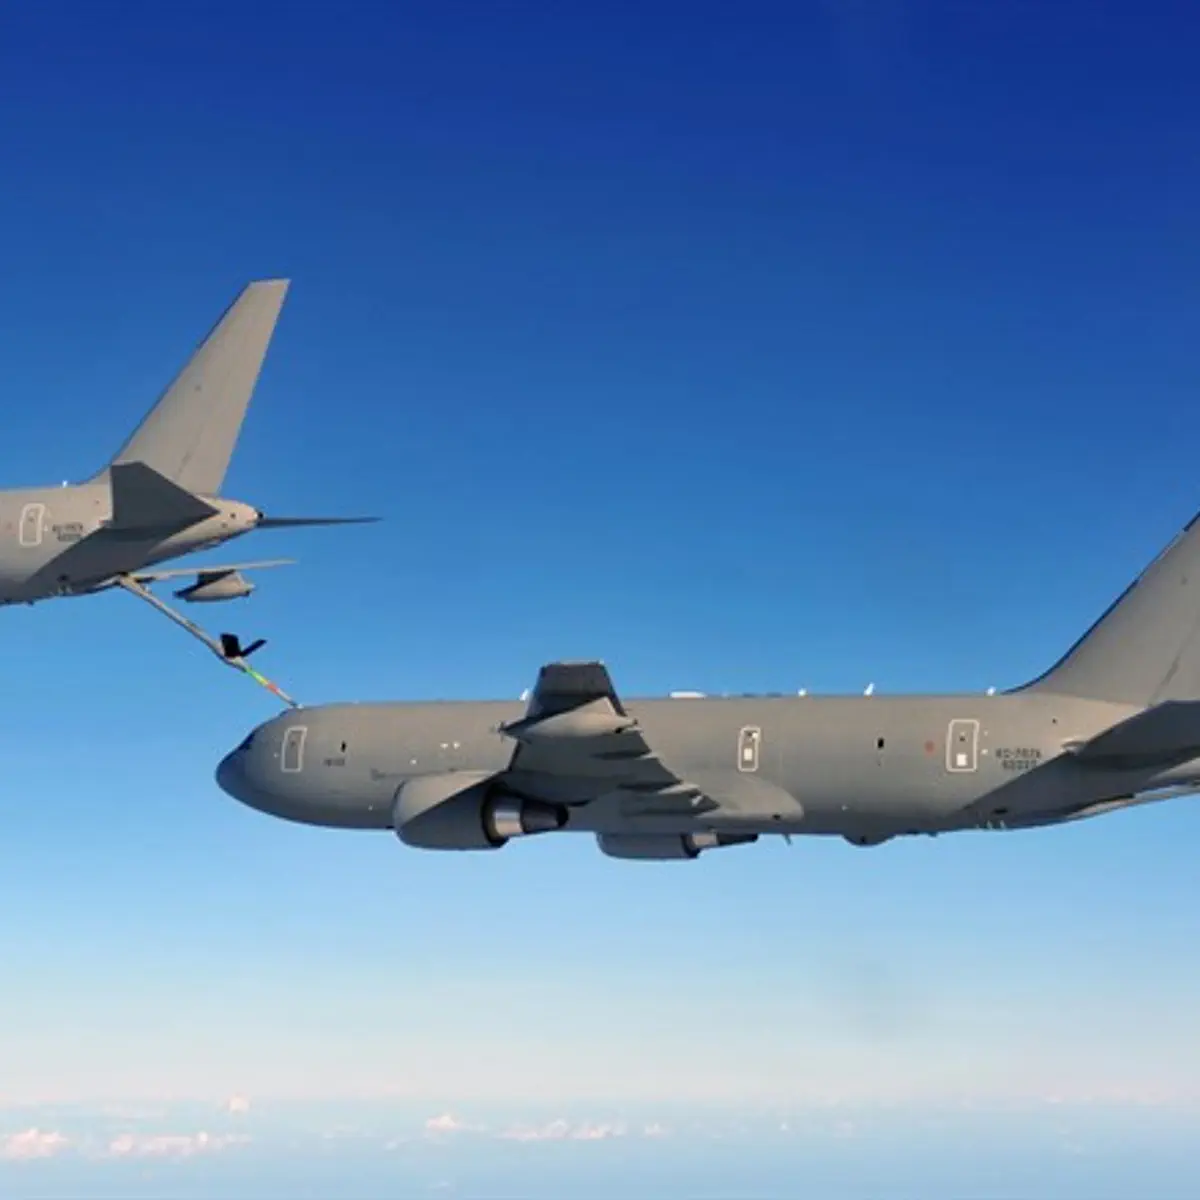 The United States has rejected a request to advance the delivery of tanker aircraft to Israel